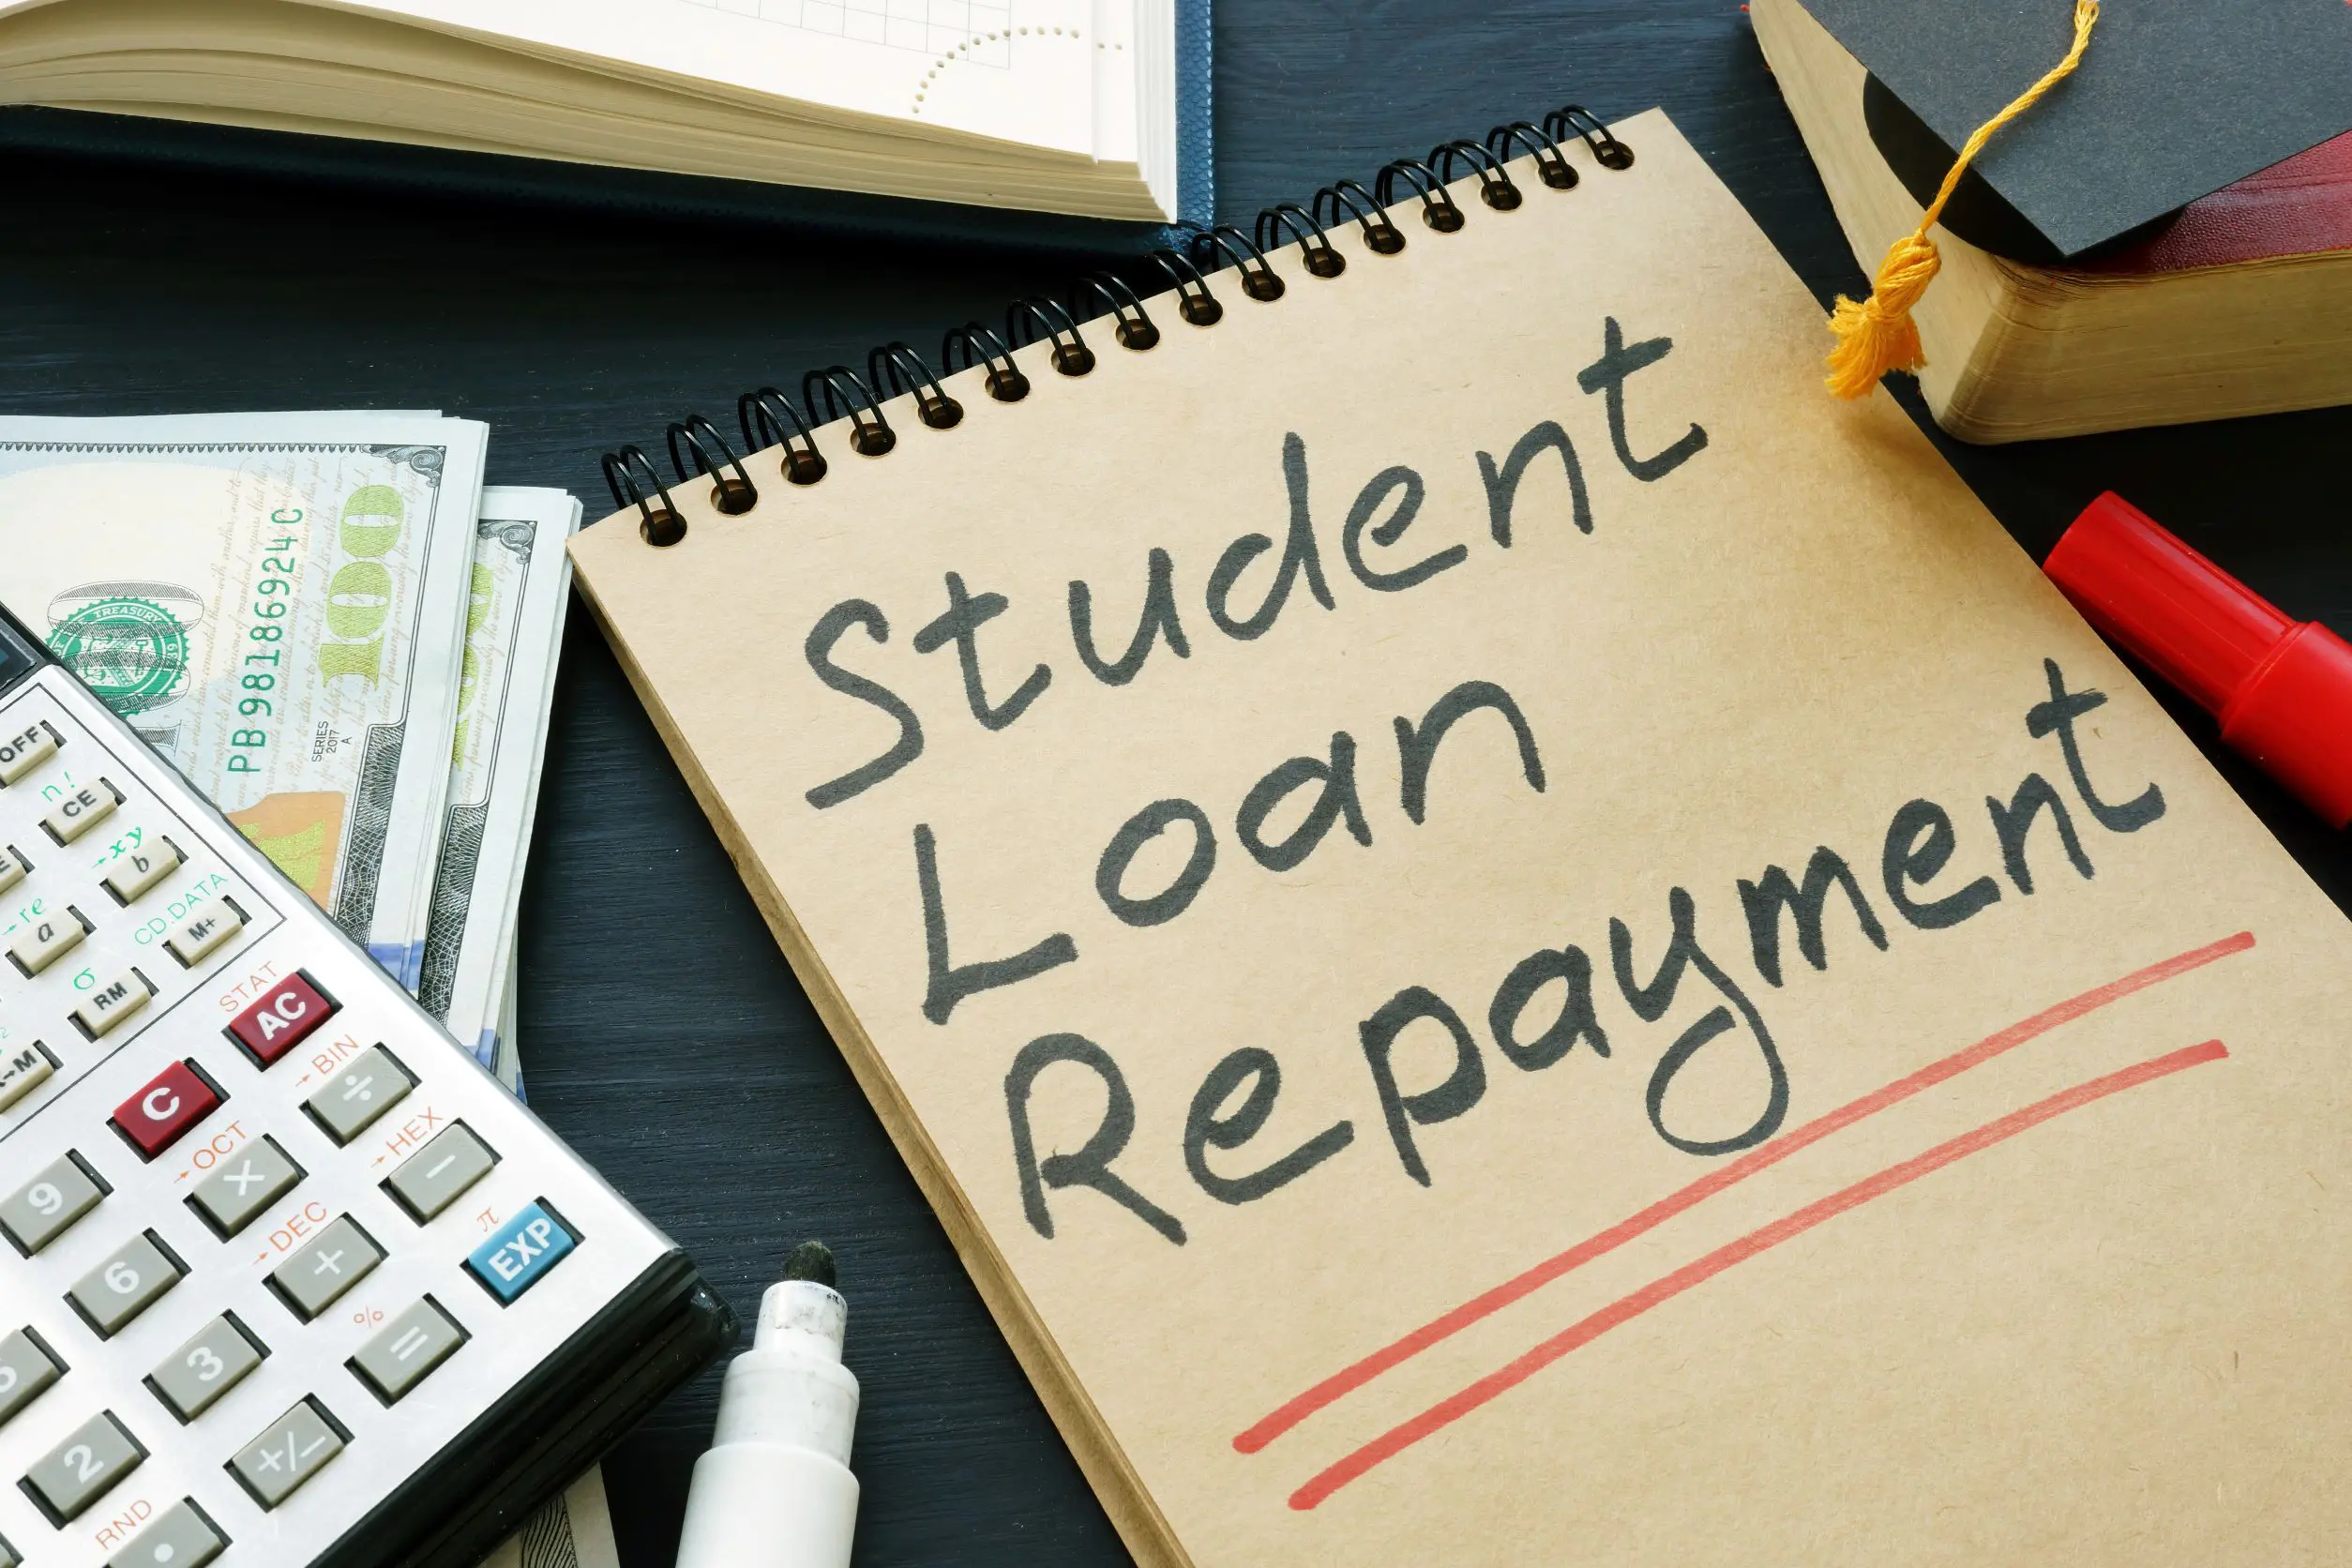 showing the image of Top 10 Private student loan repayment assistance programs